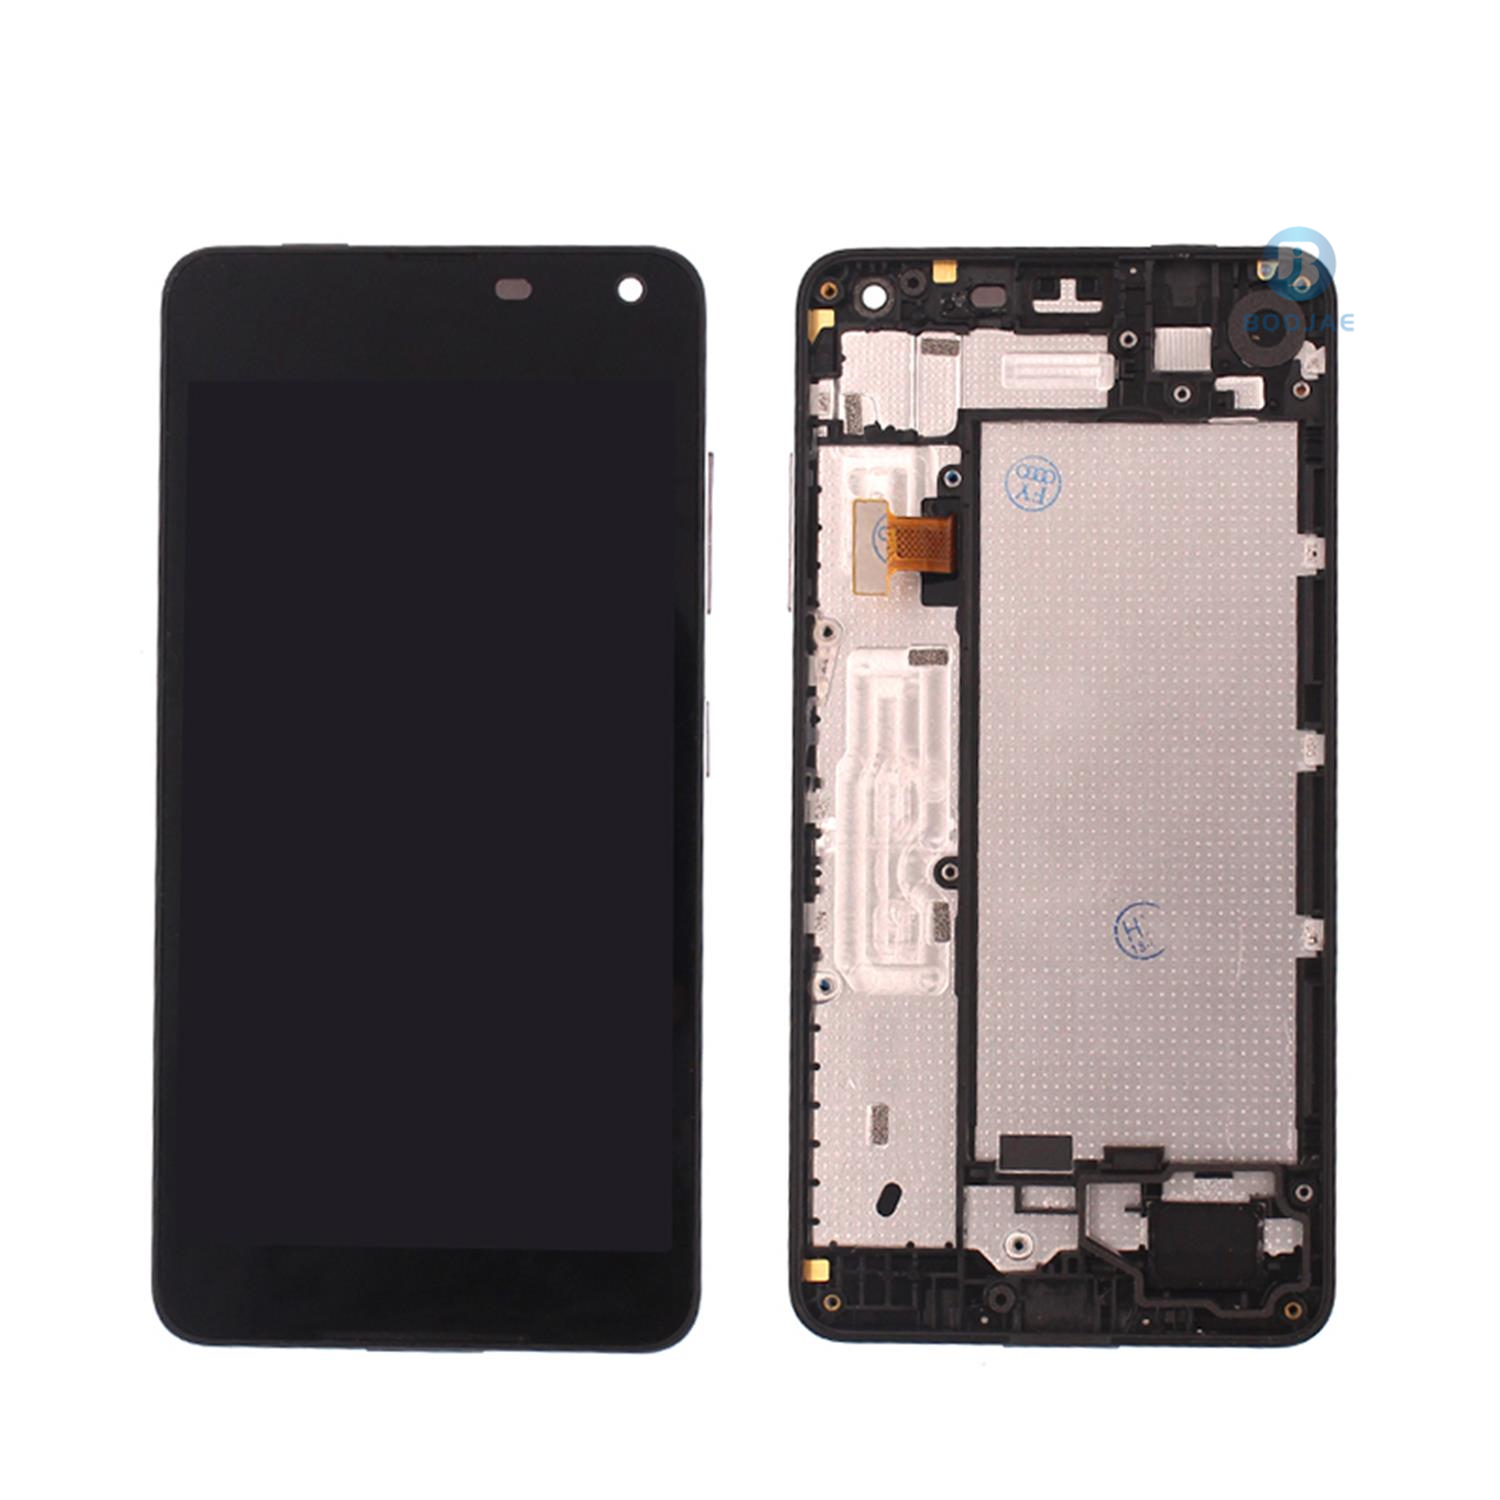 For Nokia Lumia 650 LCD Screen Display and Touch Panel Digitizer Assembly Replacement